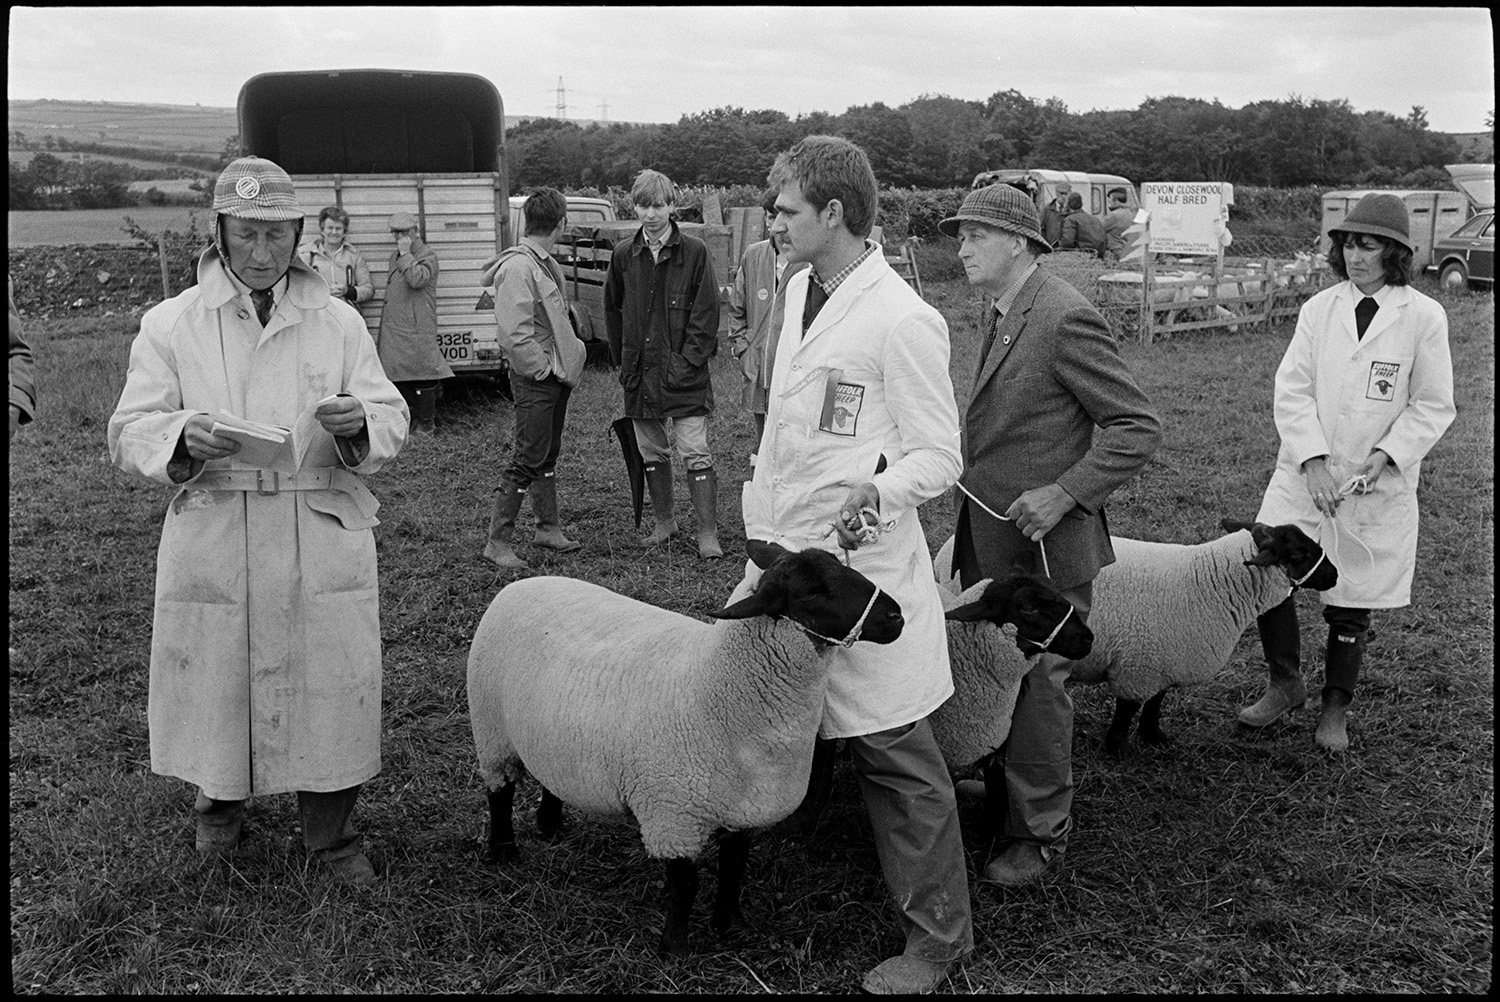 Agricultural show, judging sheep. Prize cattle in pens, spectators.
[A man judging sheep at the North Devon Show near Alverdiscott. Three black faced sheep are being shown by handlers including Nigel Allin, stood at the front. Horse boxes, trailers and pens of sheep in the background.]